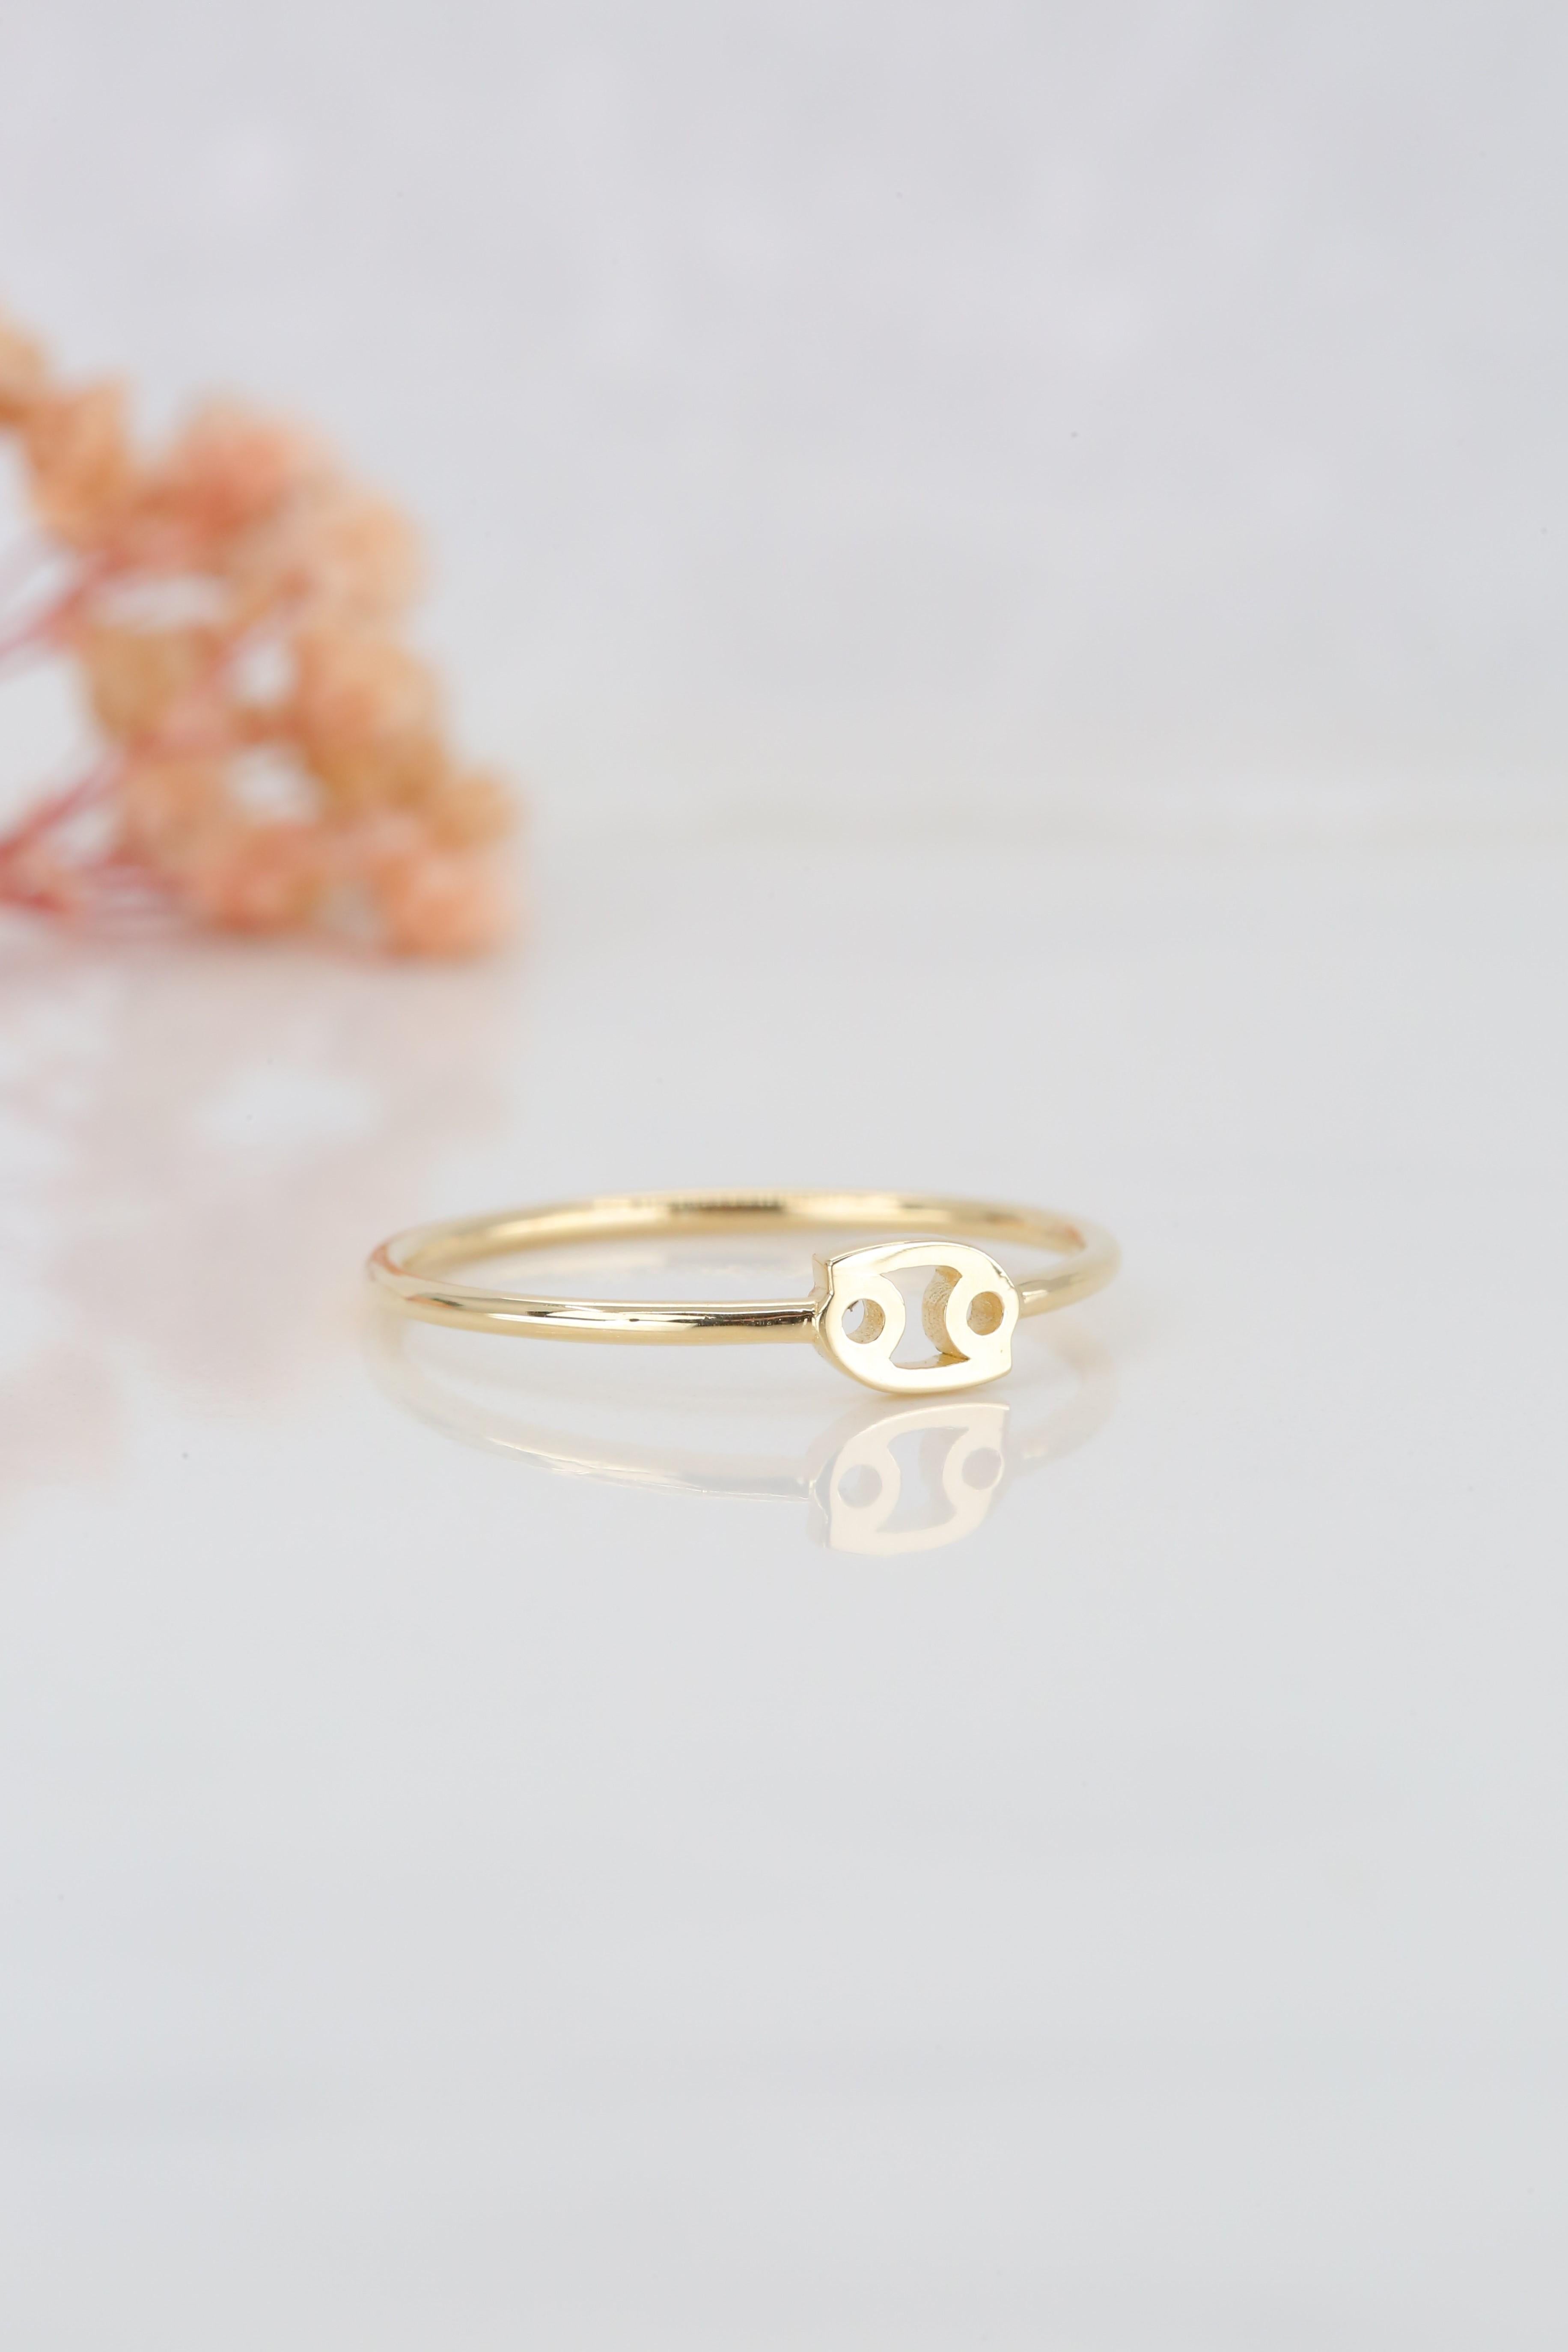 For Sale:  14K Gold Cancer Zodiac Ring, Cancer Sign Zodiac Ring 10